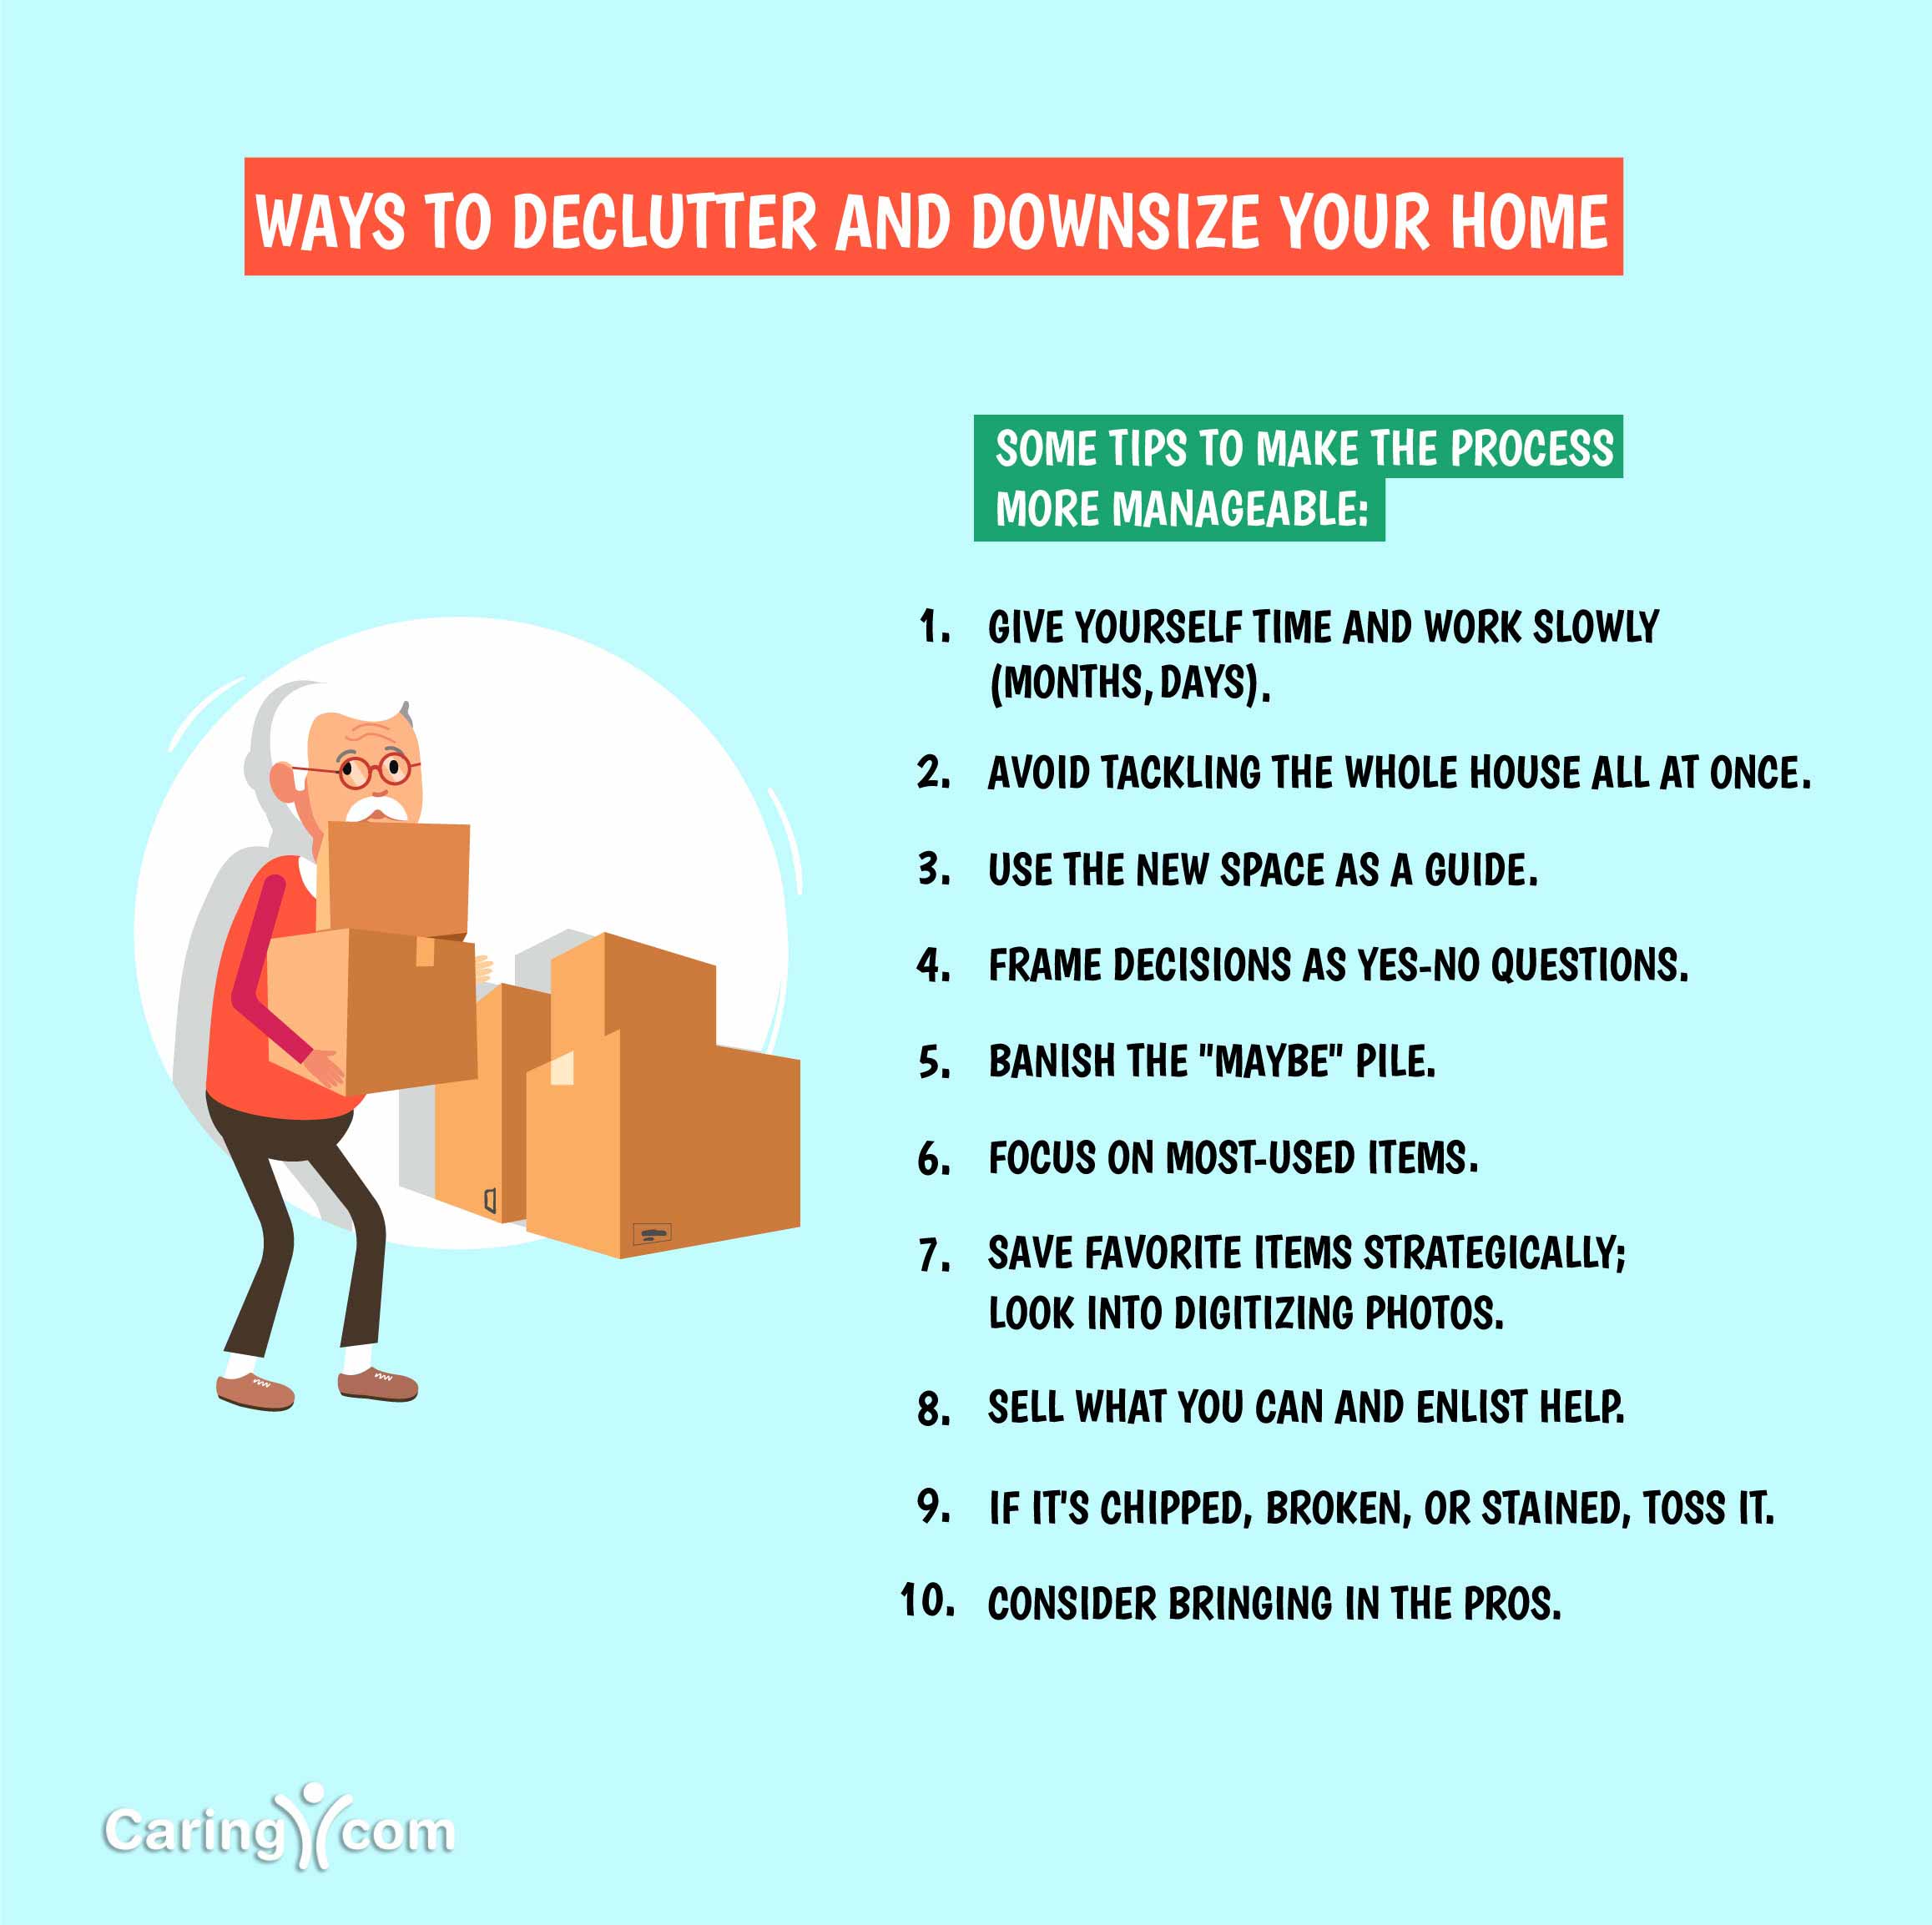 Ways to Declutter and Downsize Your Home